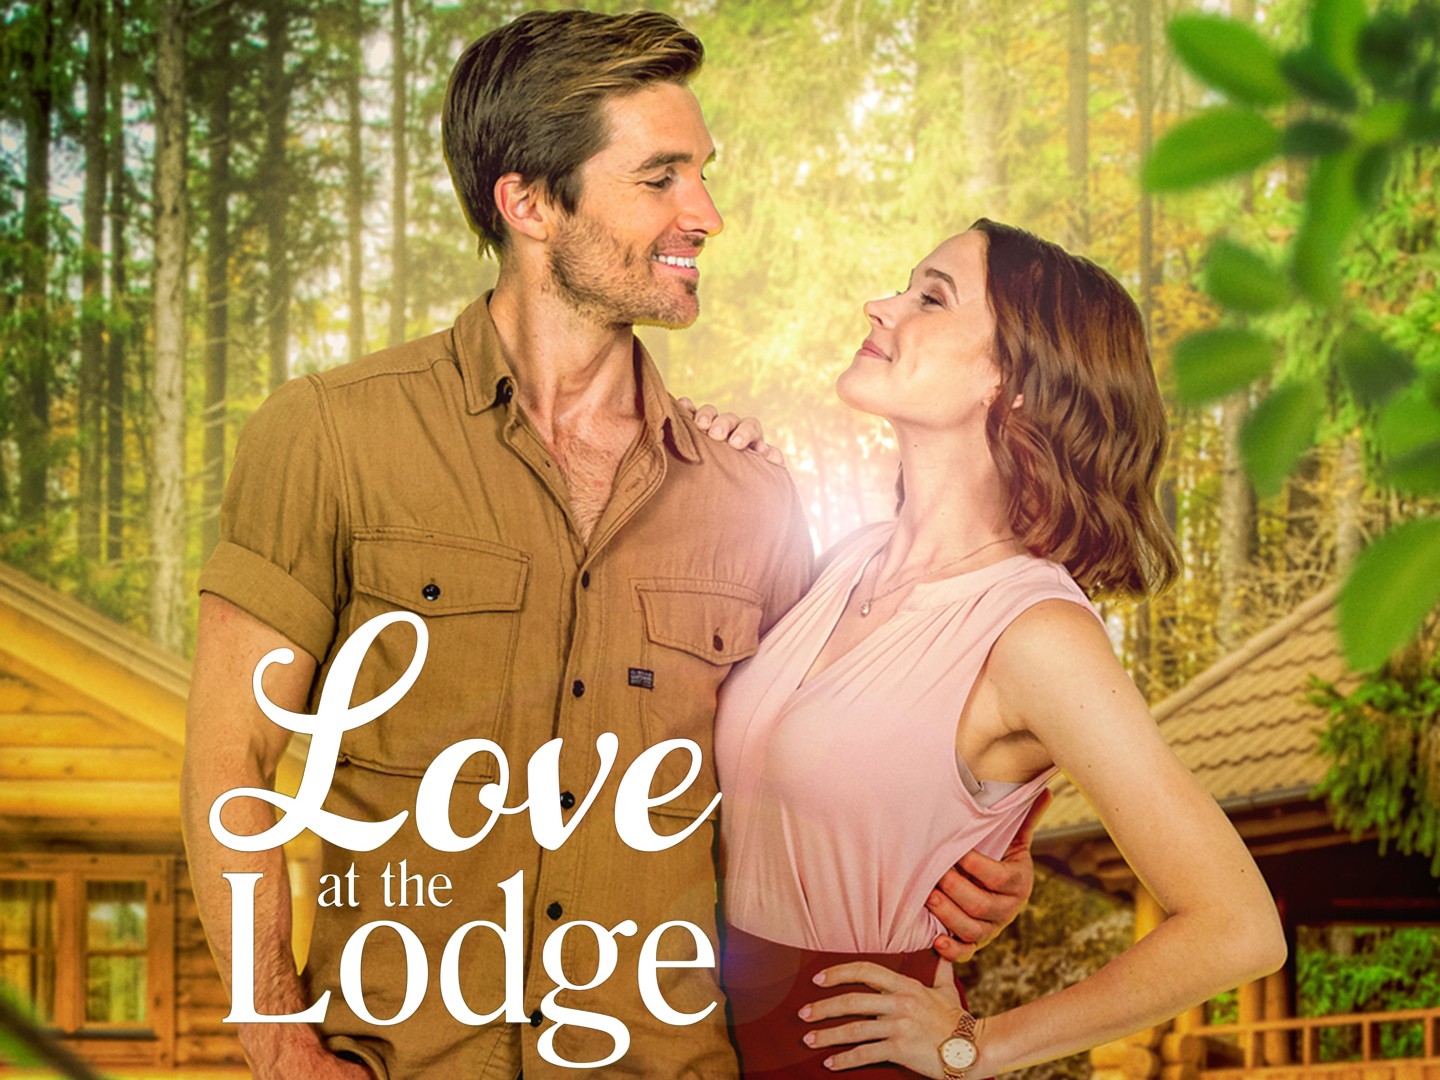 The Lodge - Where to Watch and Stream - TV Guide